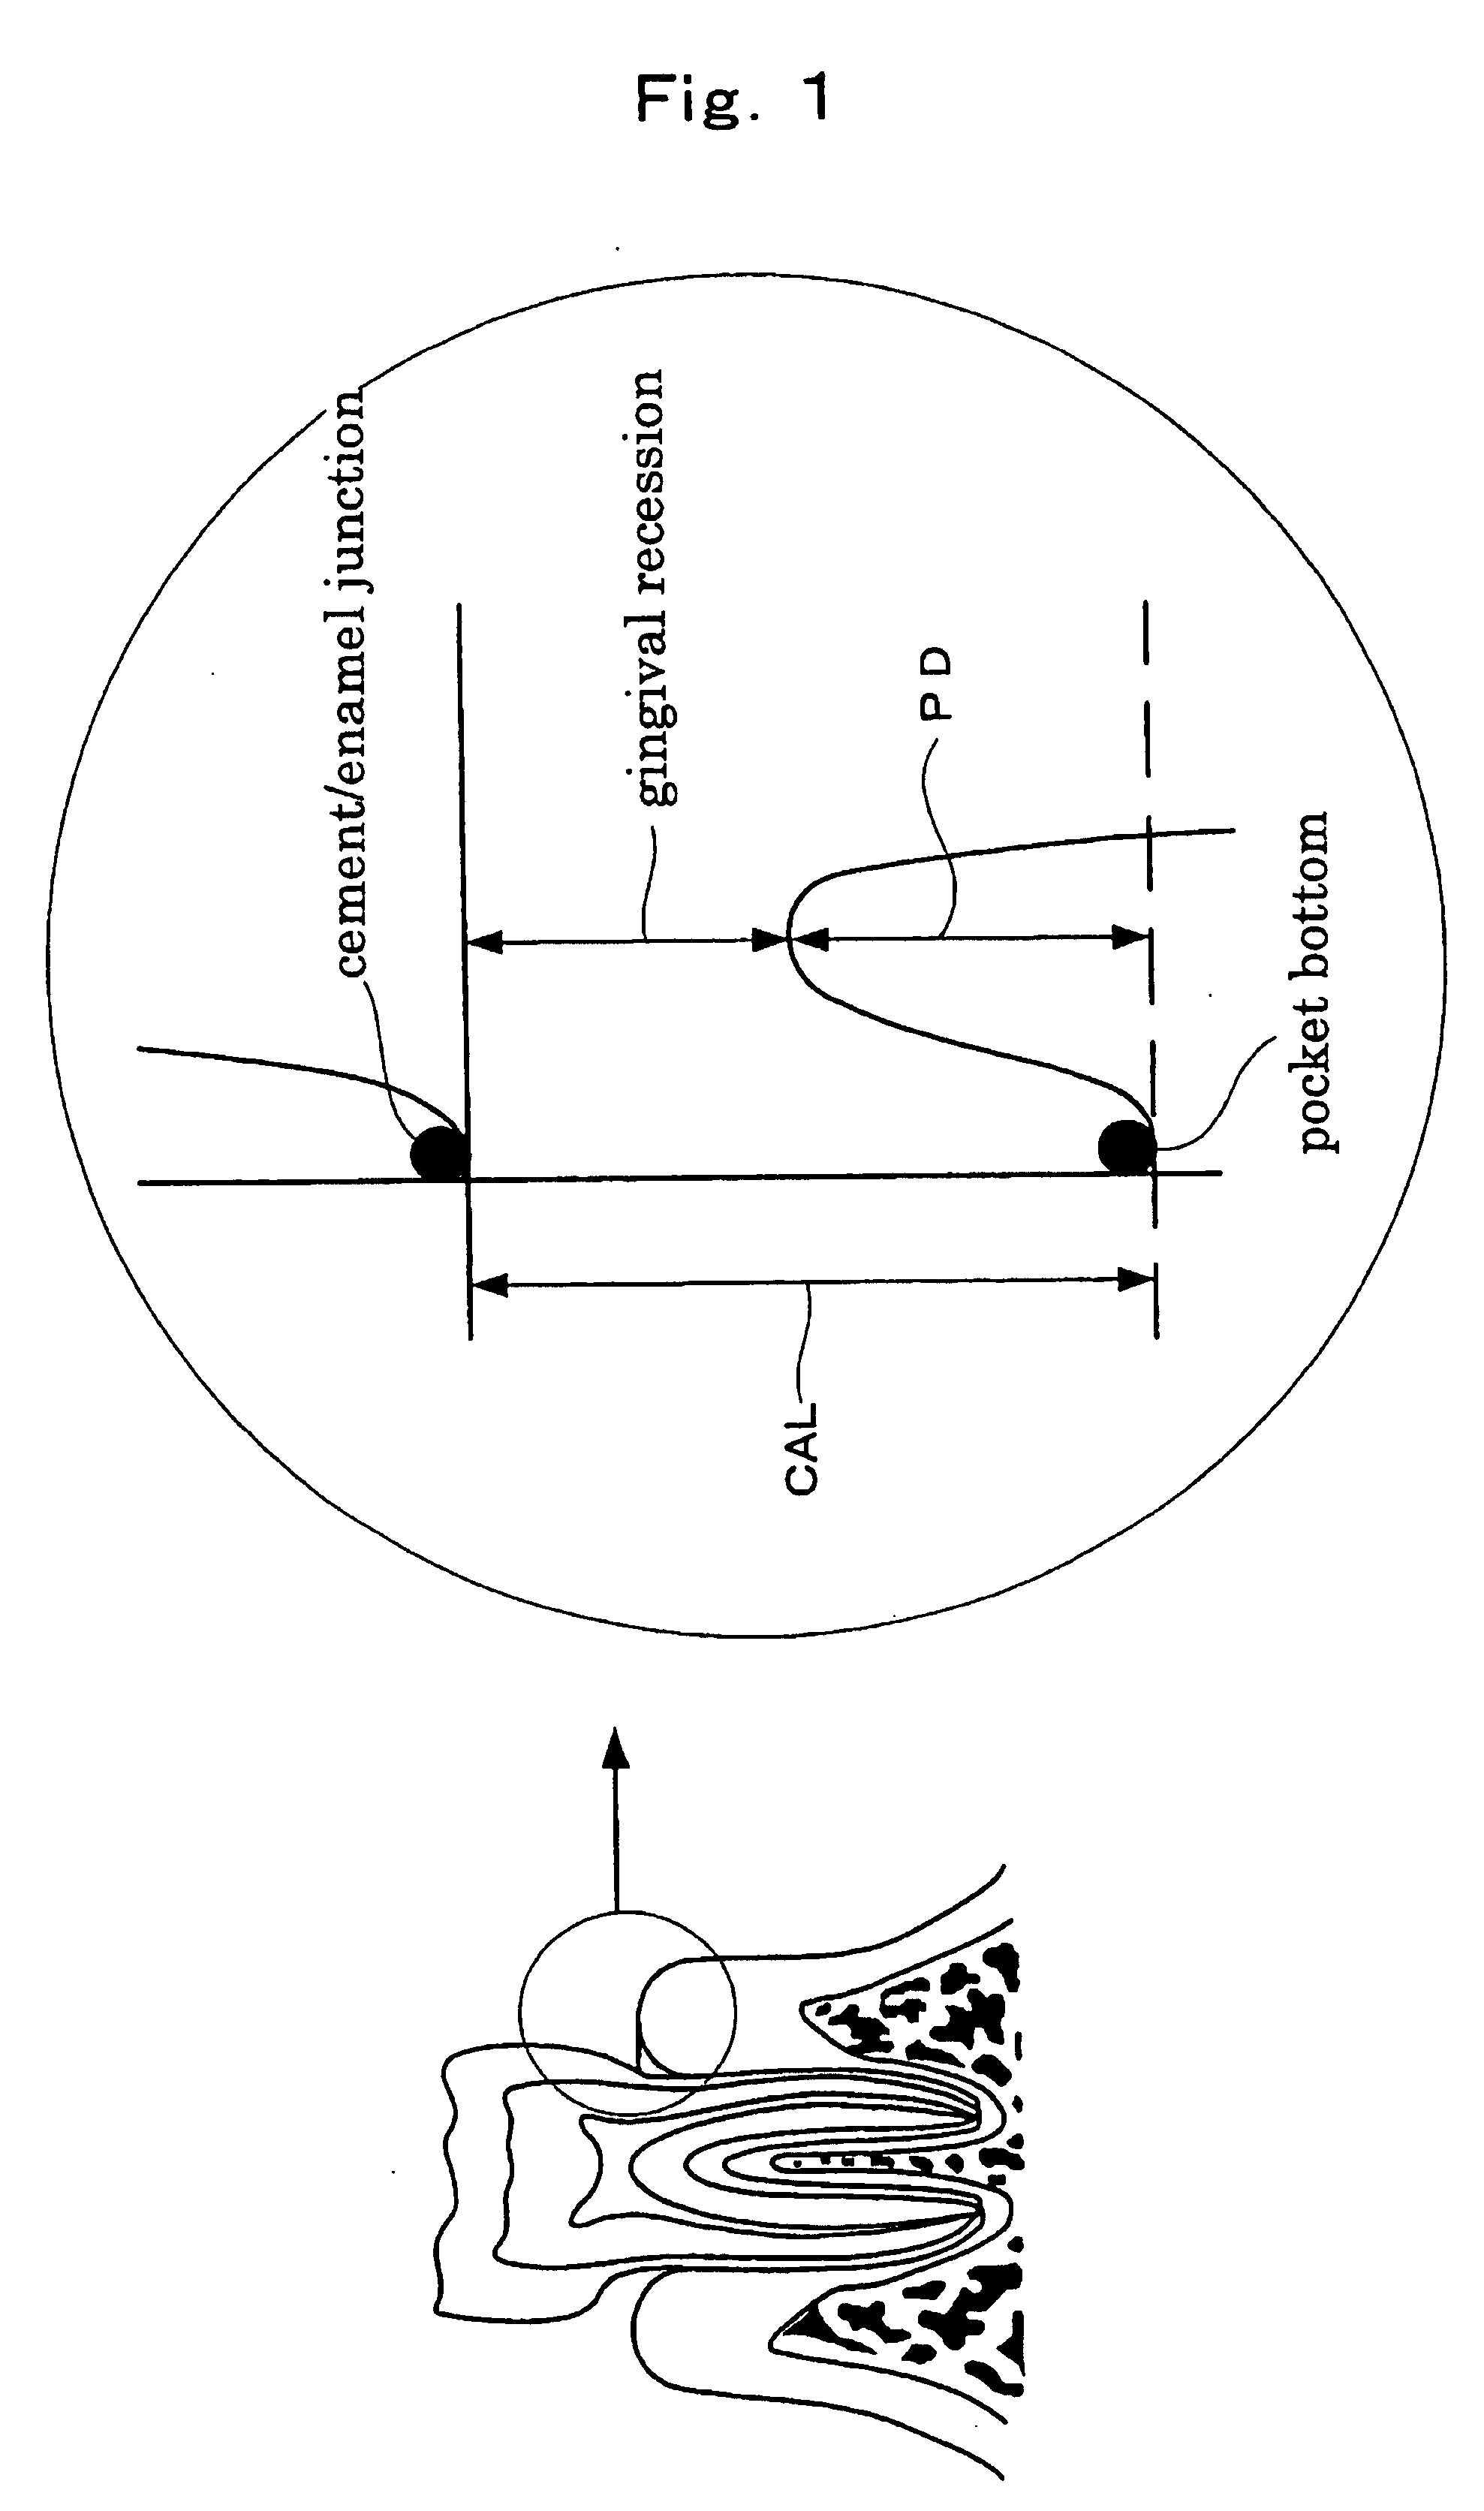 Method of inhibiting alveolar bone resorption and periodontal membrane loss and composition for internal use to be used therein